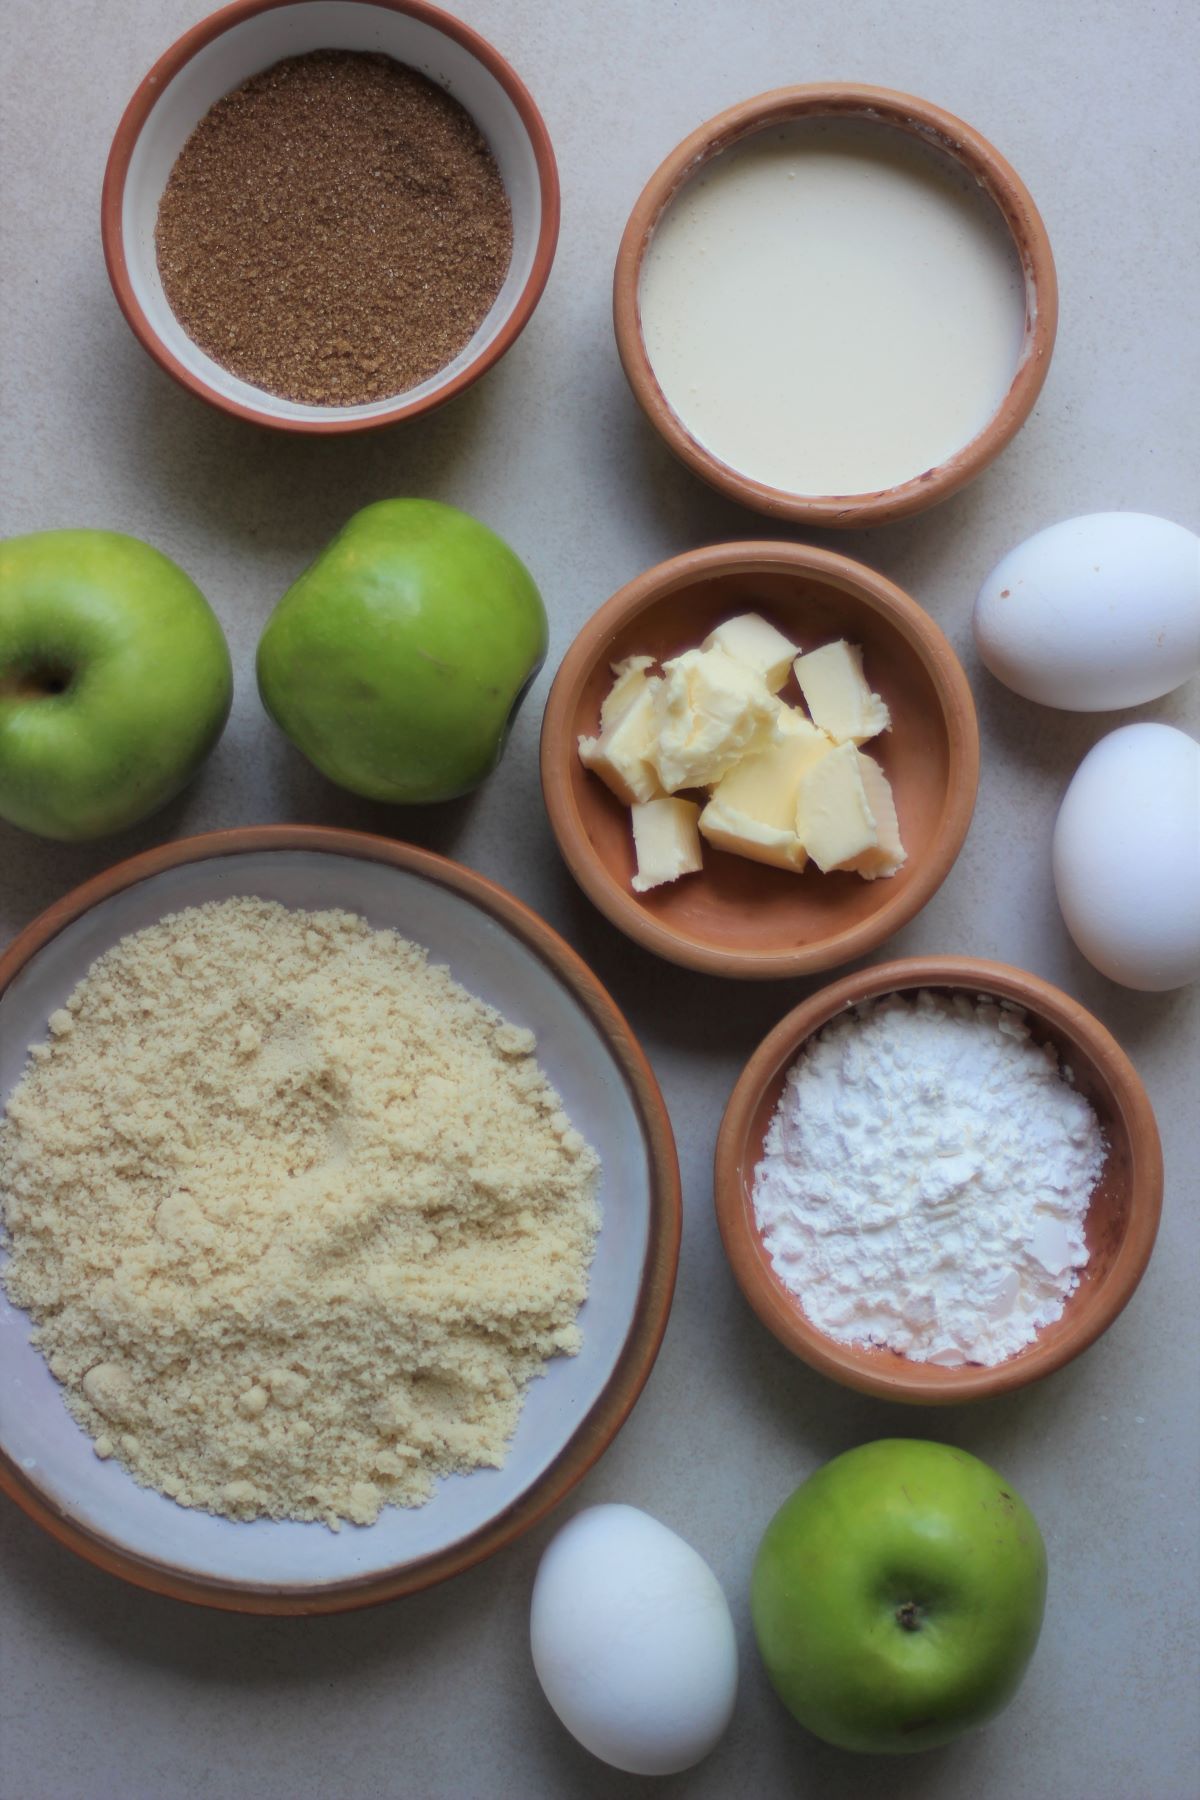 Quick apple and cinnamon cake ingredients.